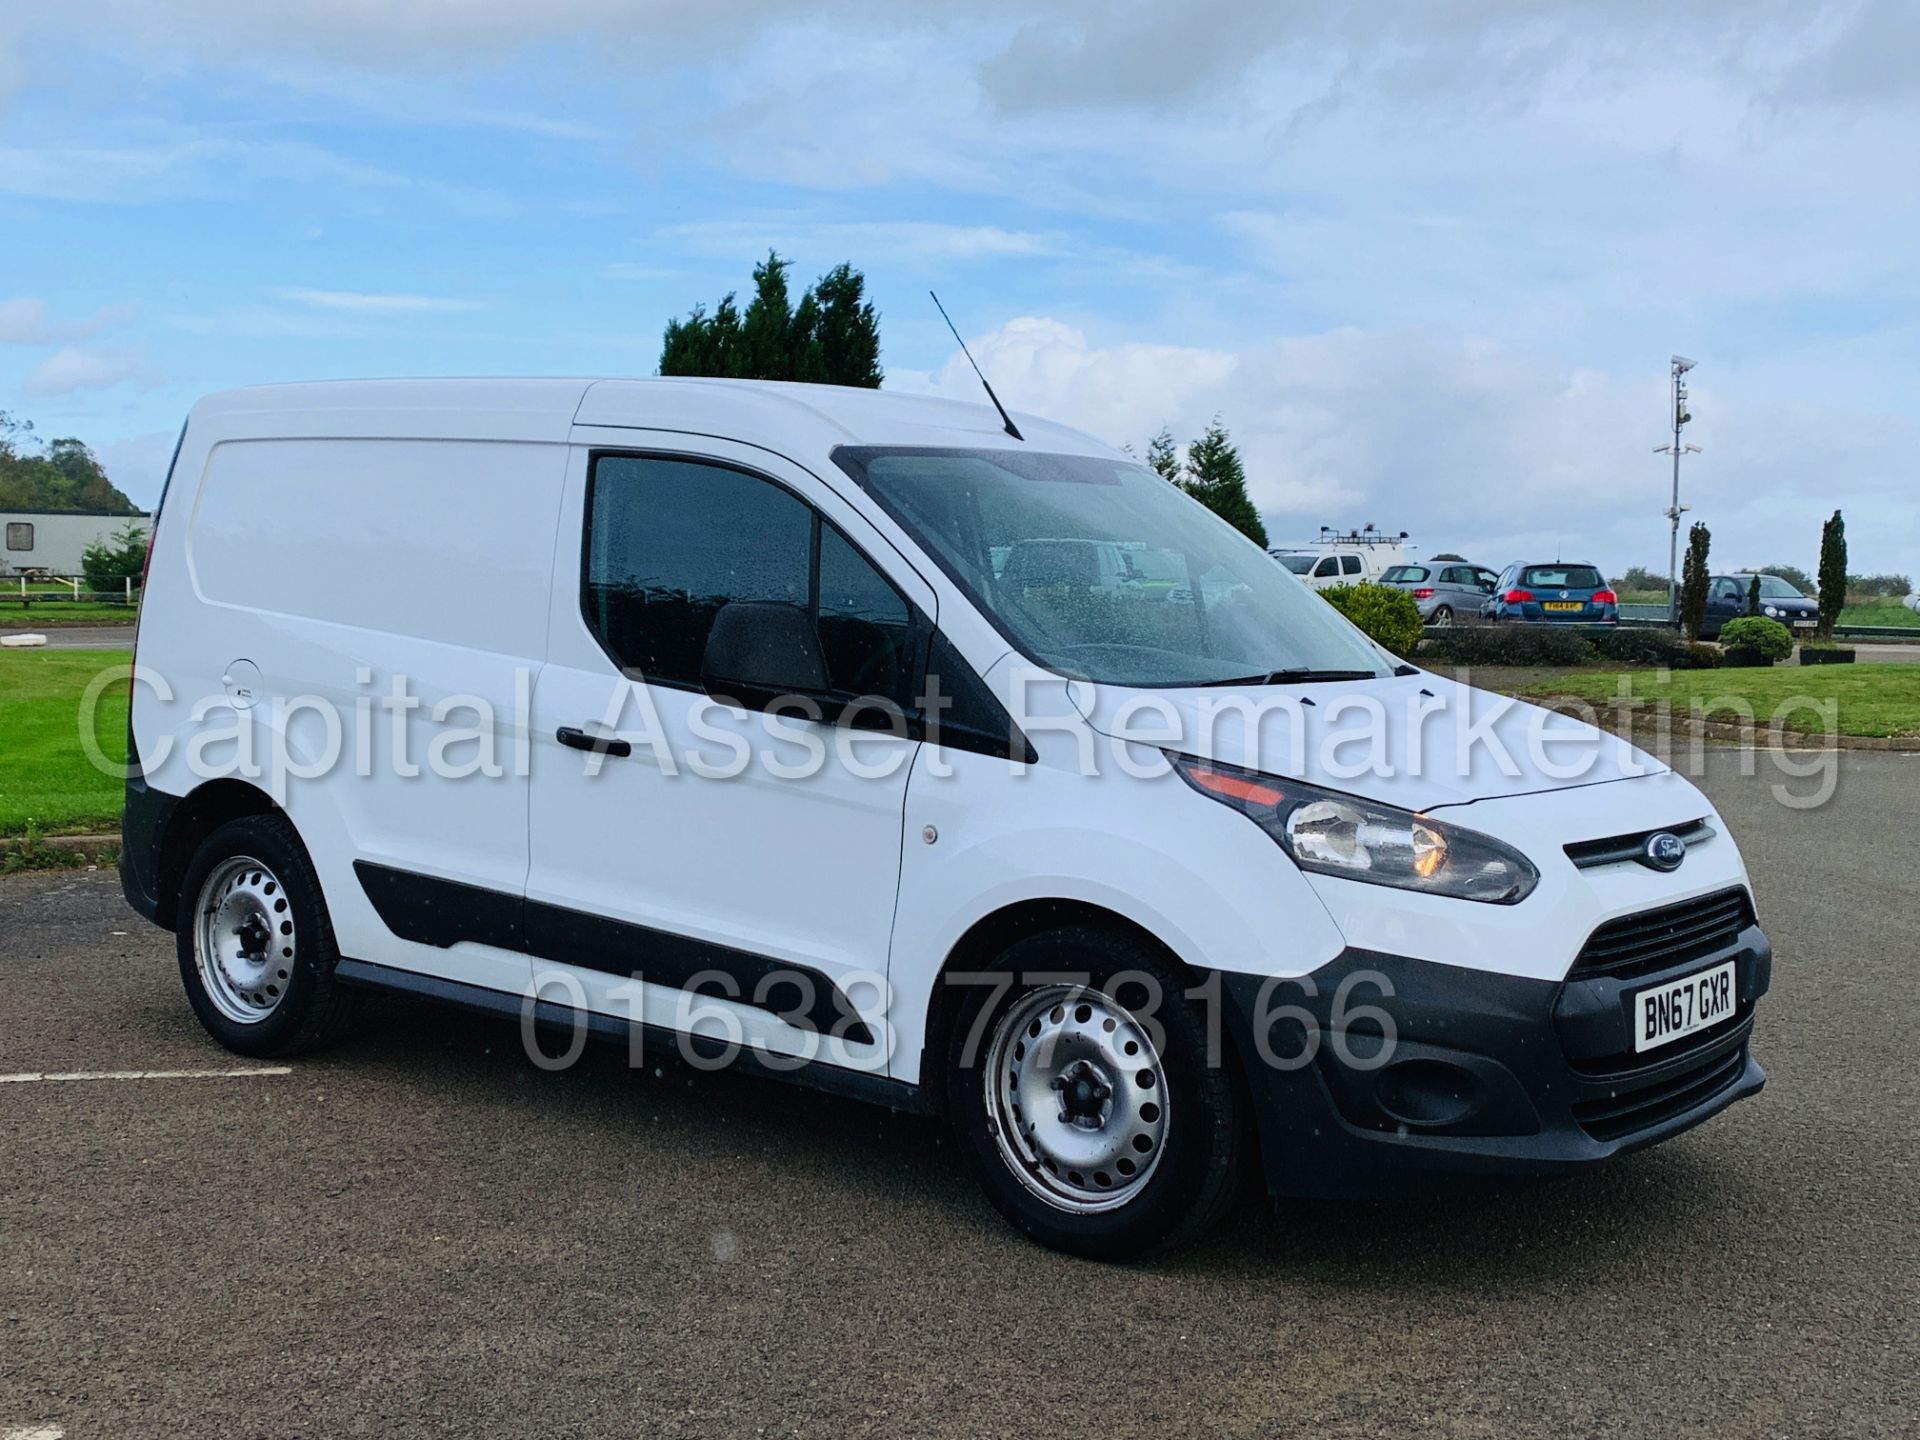 (On Sale) FORD TRANSIT CONNECT 75 T200 *SWB* (67 REG) '1.5 TDCI - EURO 6 COMPLIANT' (1 OWNER) - Image 9 of 36